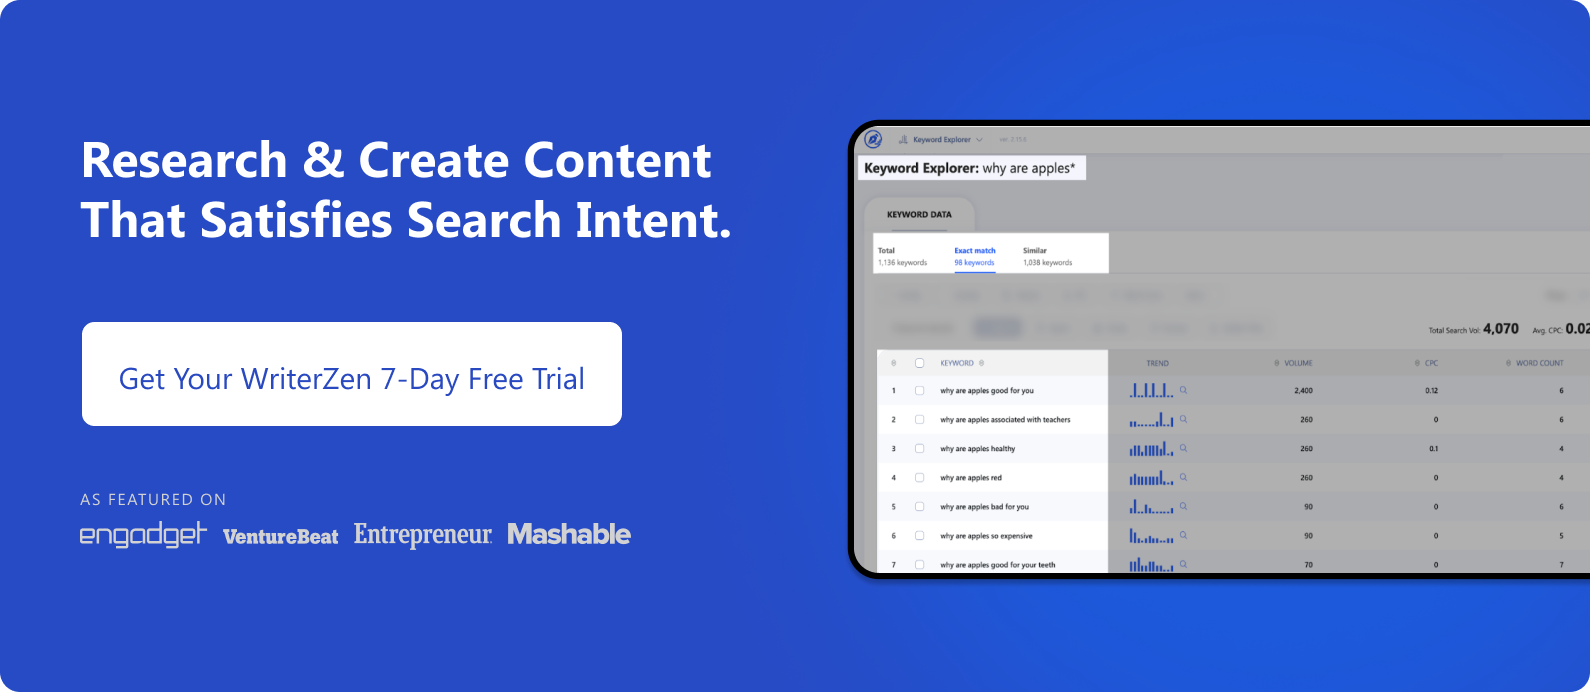 Research and Create Content That Satisfies Search Intent